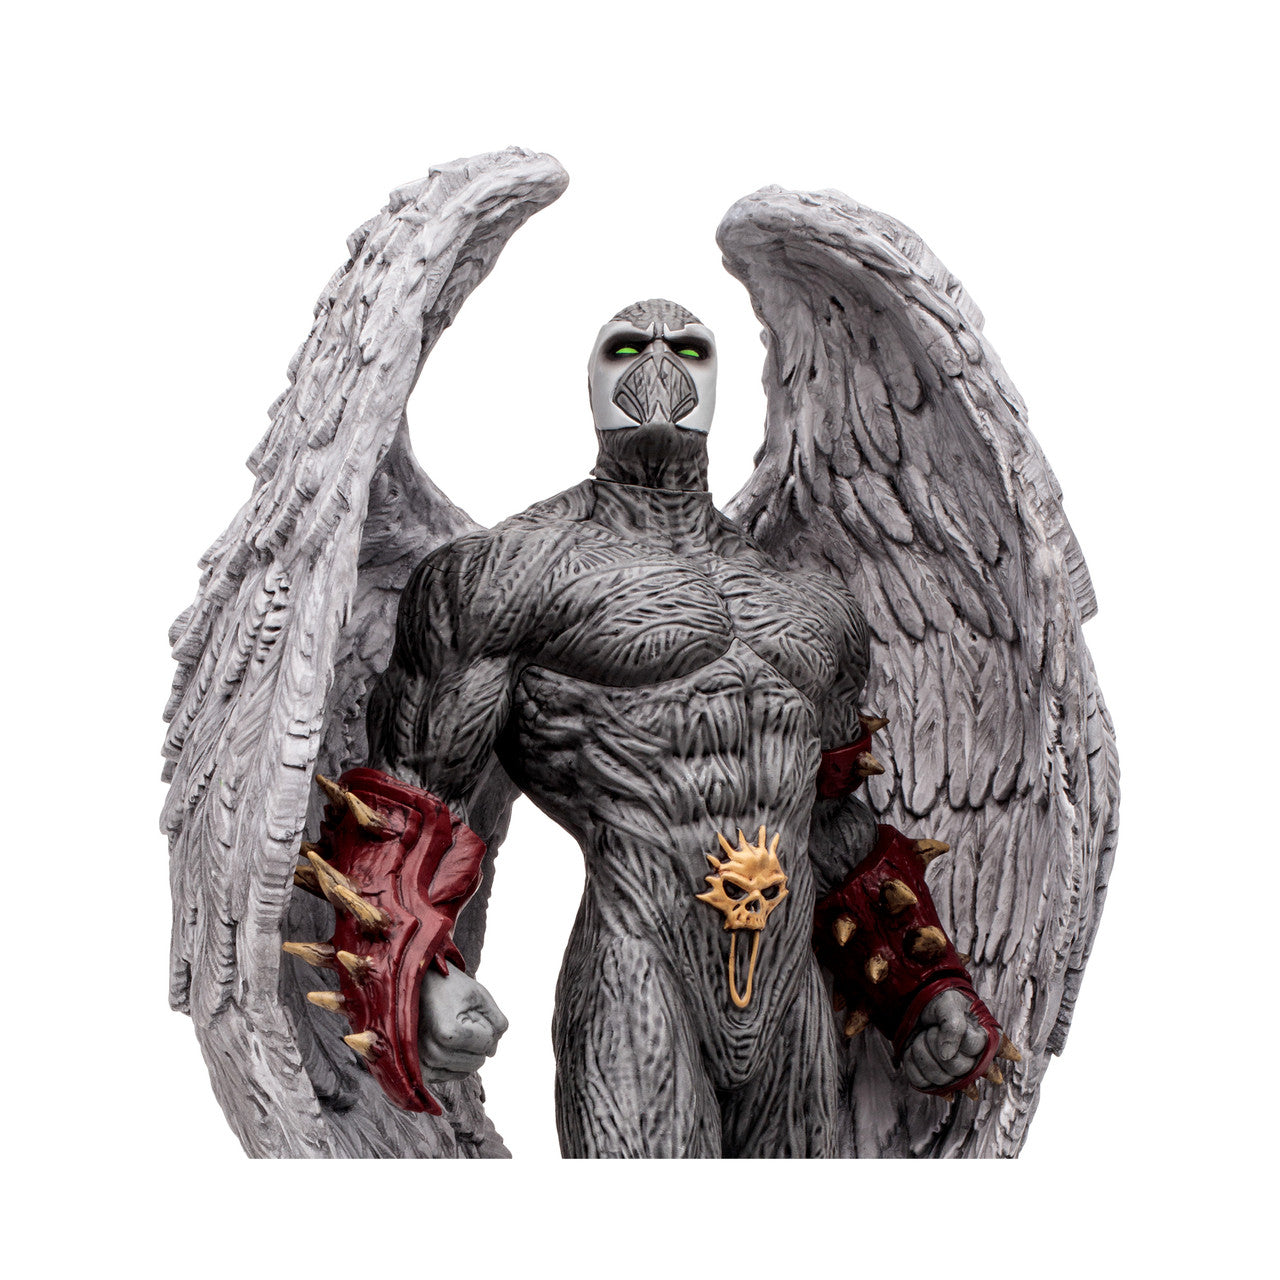 [PRE-ORDER] Spawn (Wings of Redemption) 1:8 Statue w/Digital Collectible  12-Inch Posed Statue